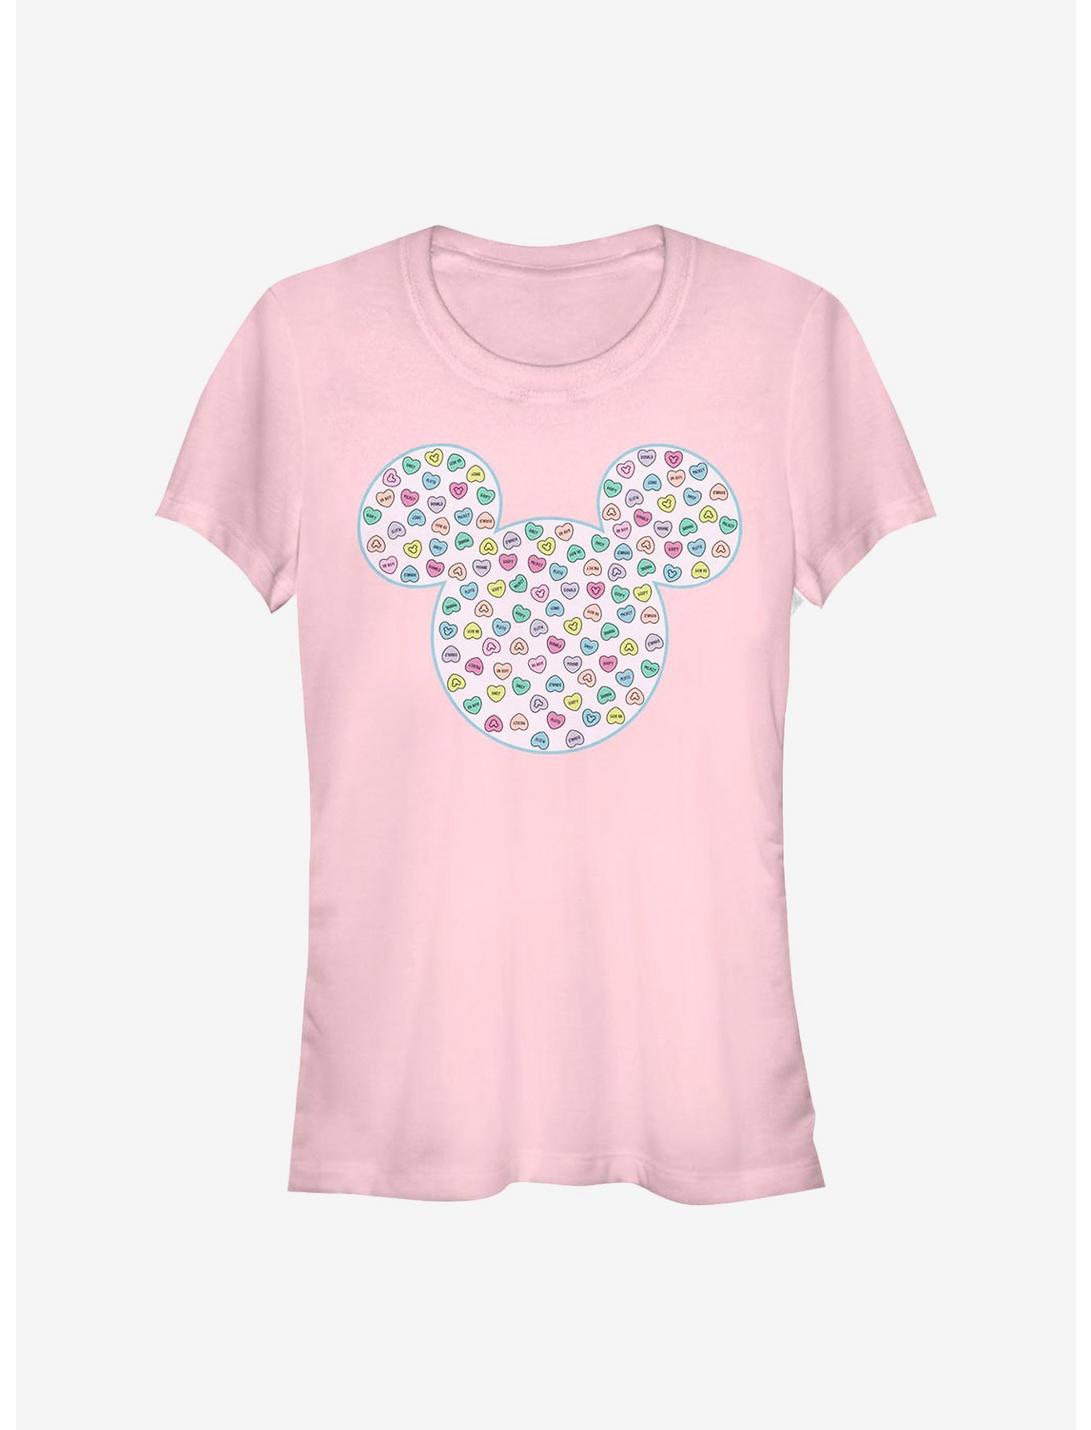 Disney Mickey Mouse Mickey Candy Ears Girls T-Shirt, LIGHT PINK, hi-res